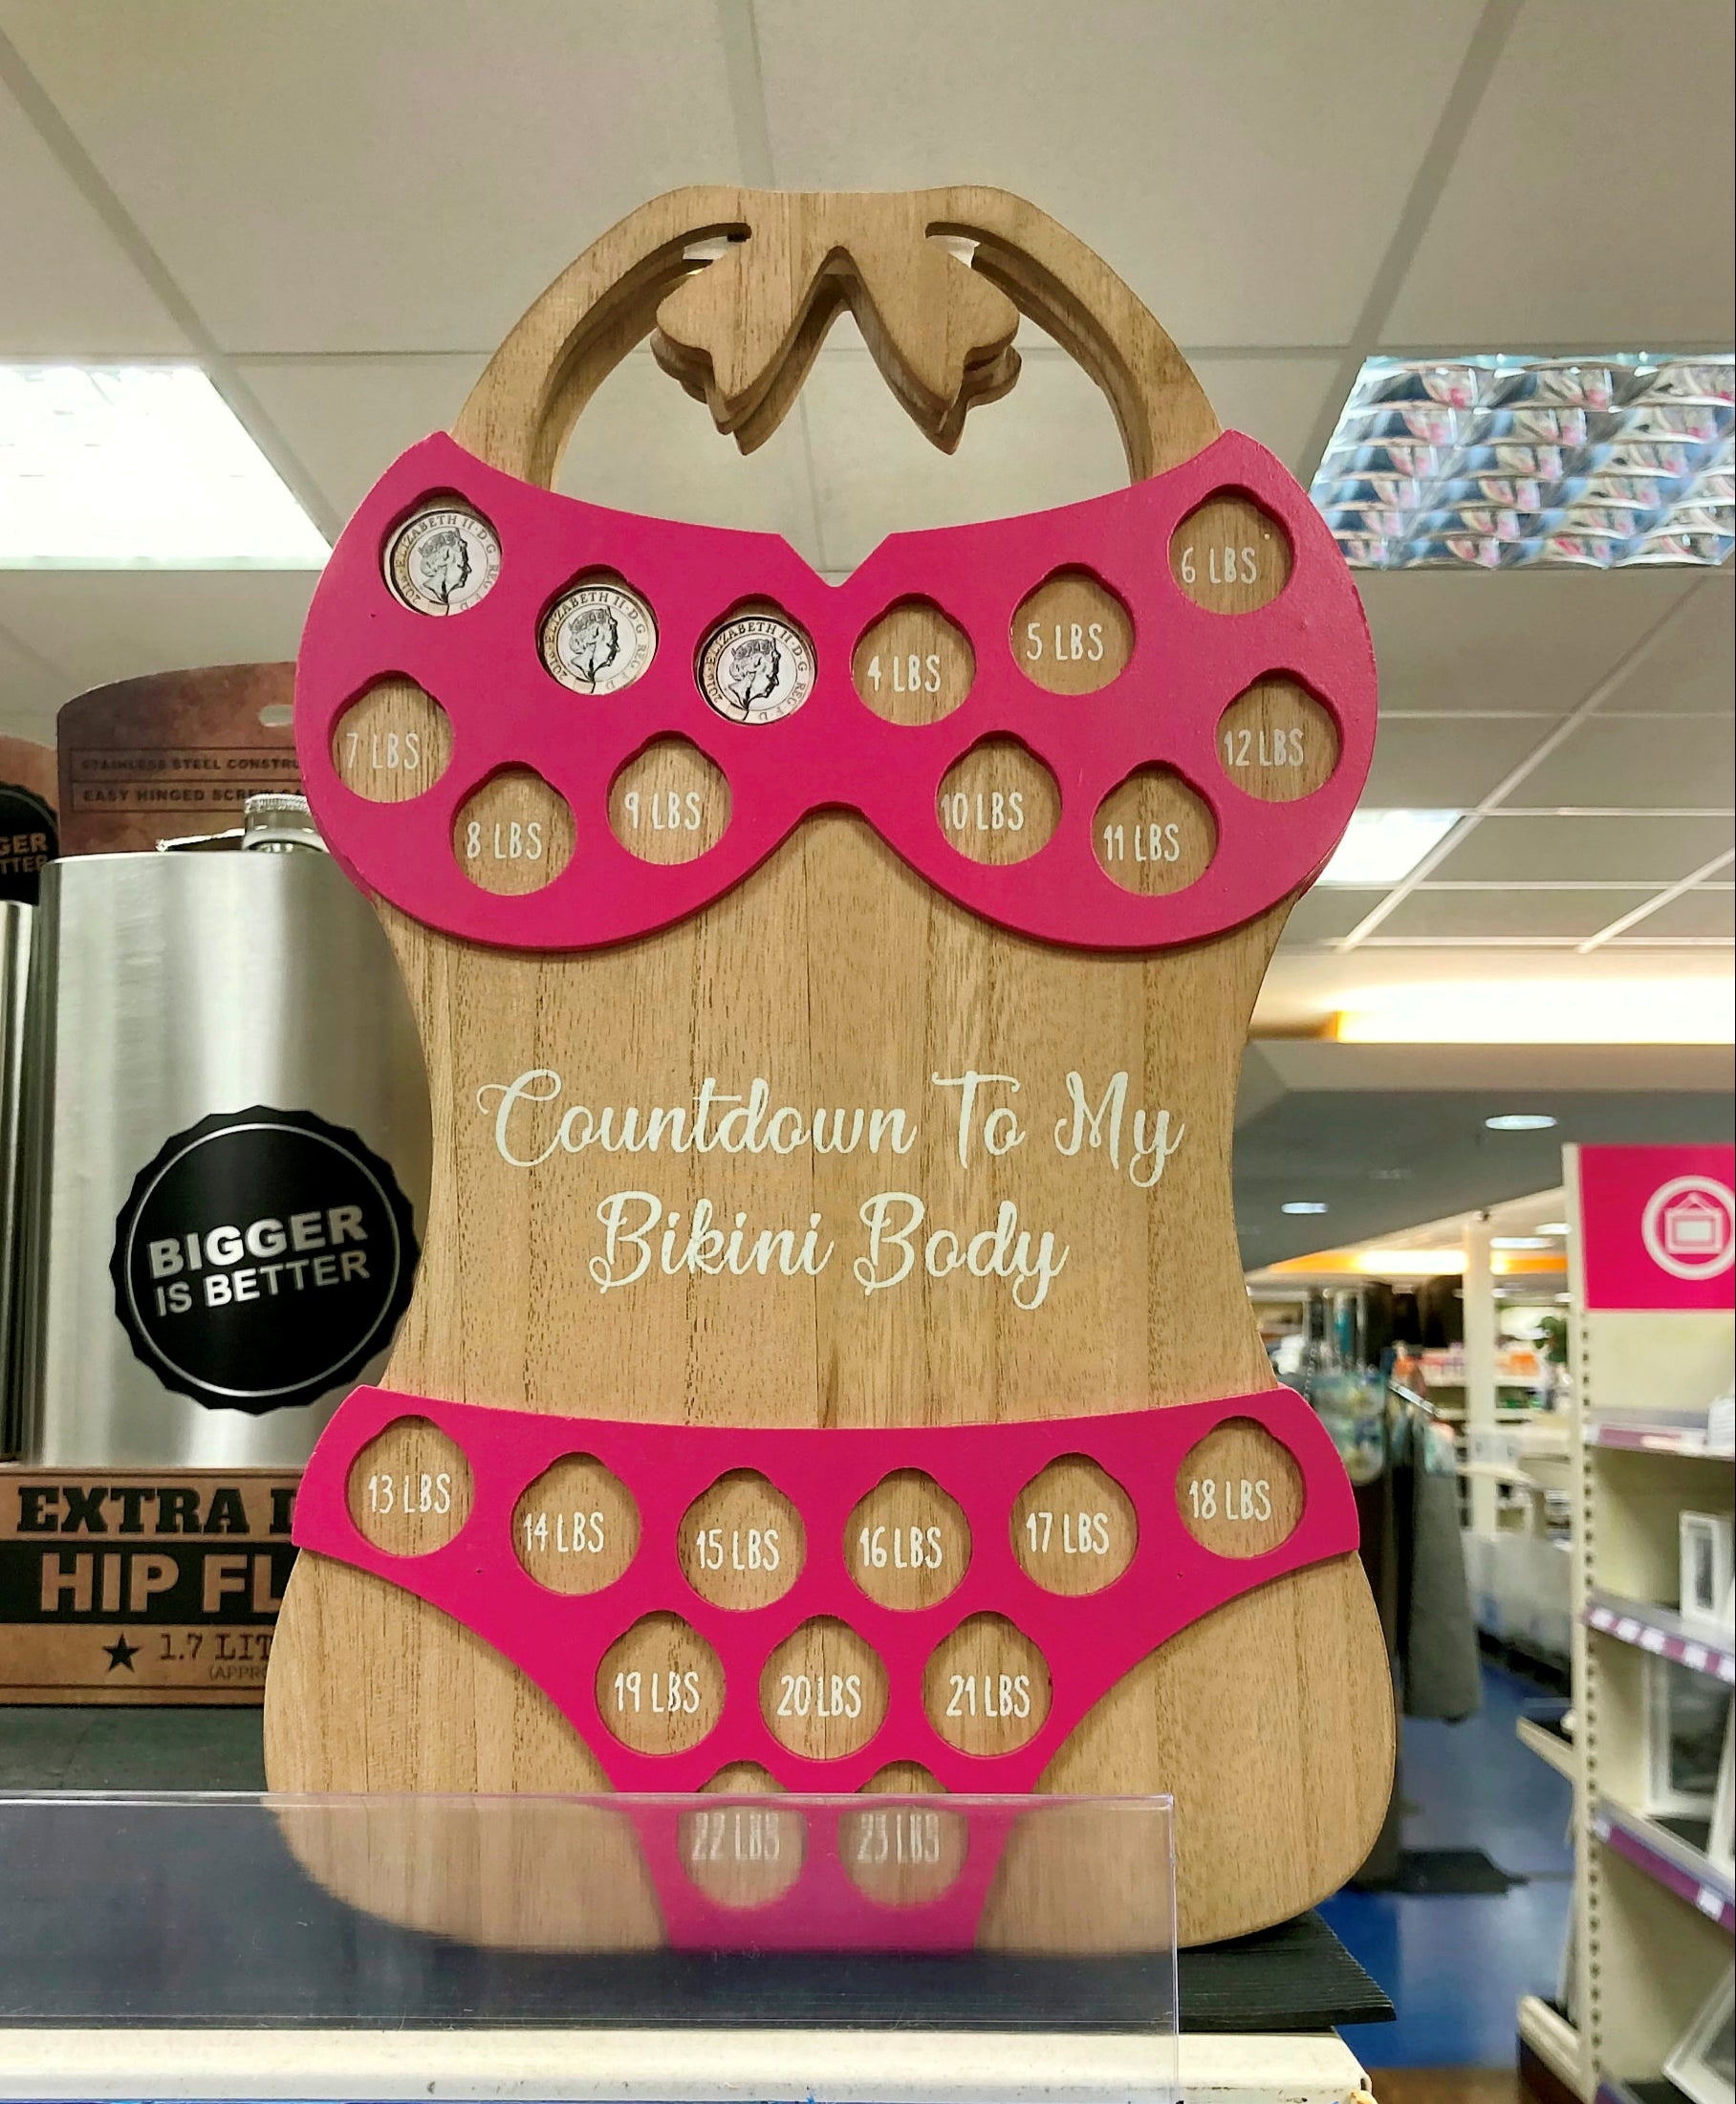 The Range is selling a “countdown calendar” encouraging women to lose 23 lbs